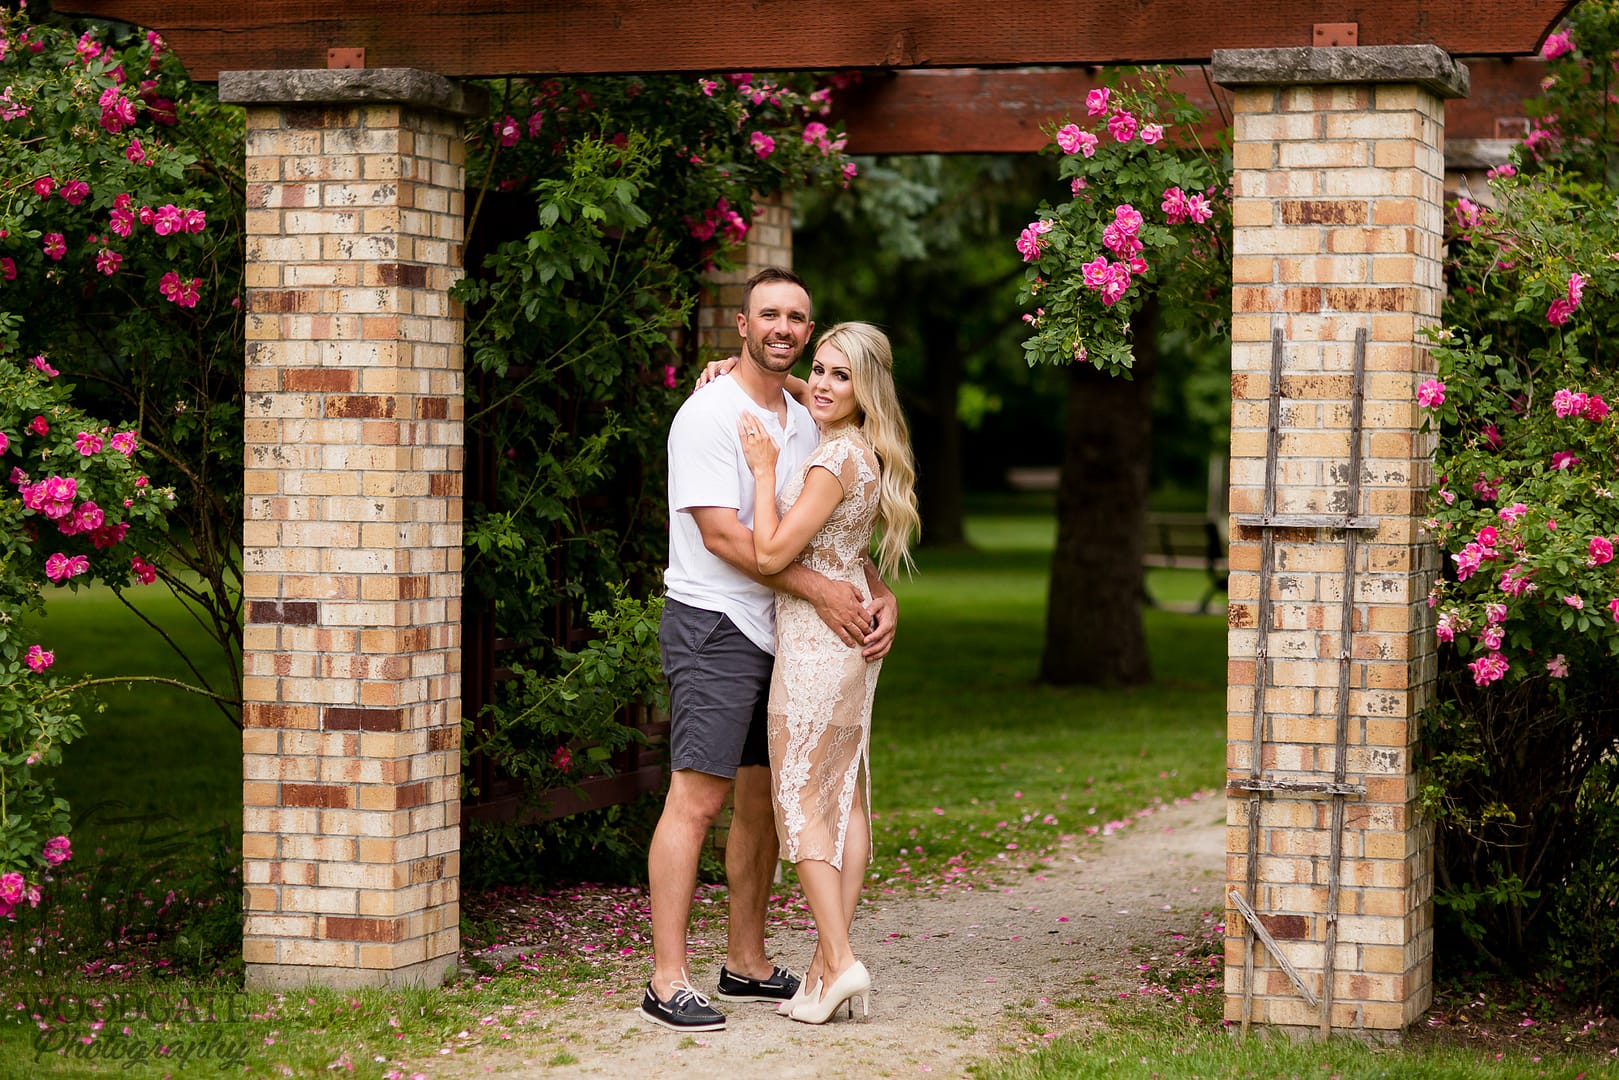 Best of 2019: Engagement Photography